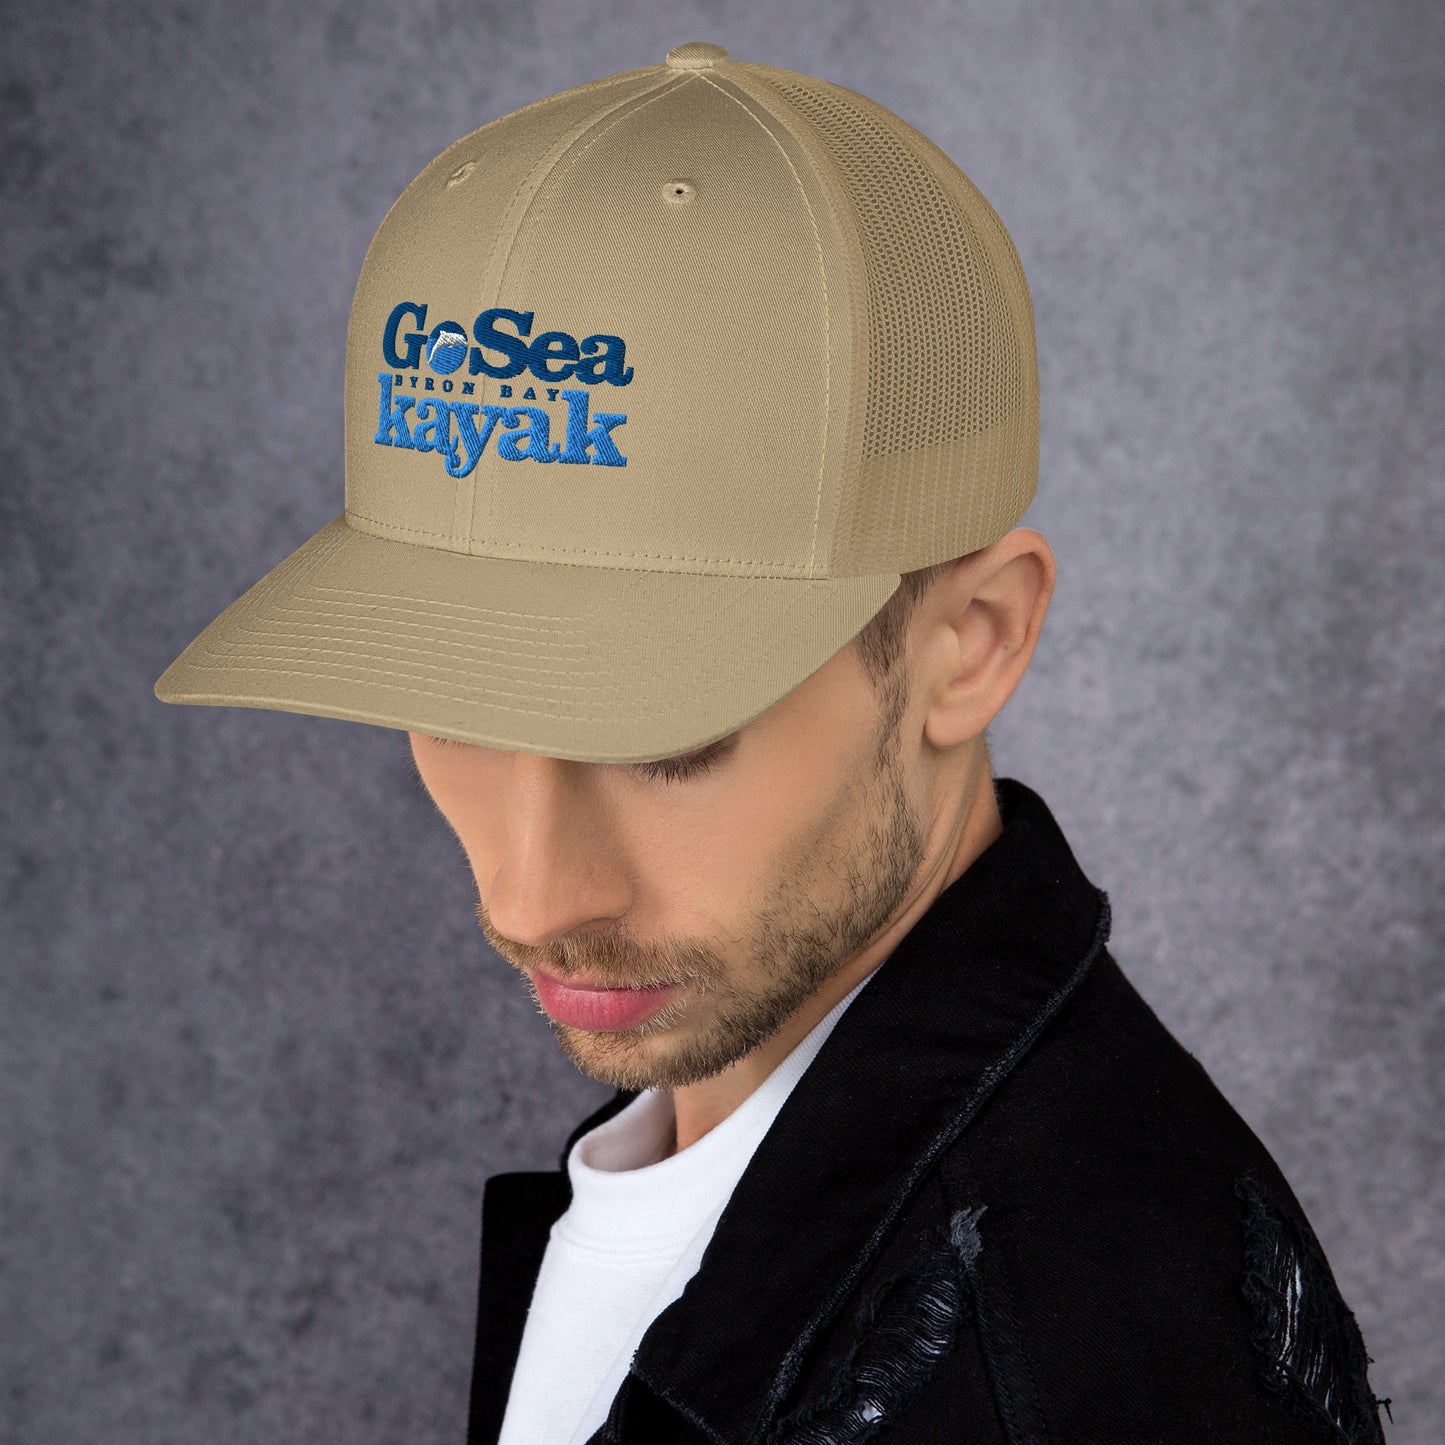  Trucker Cap - Khaki - Side view - being warn by man with his head down - Go Sea Kayak Byron Bay logo on front - Genuine Byron Bay Merchandise | Produced by Go Sea Kayak Byron Bay 